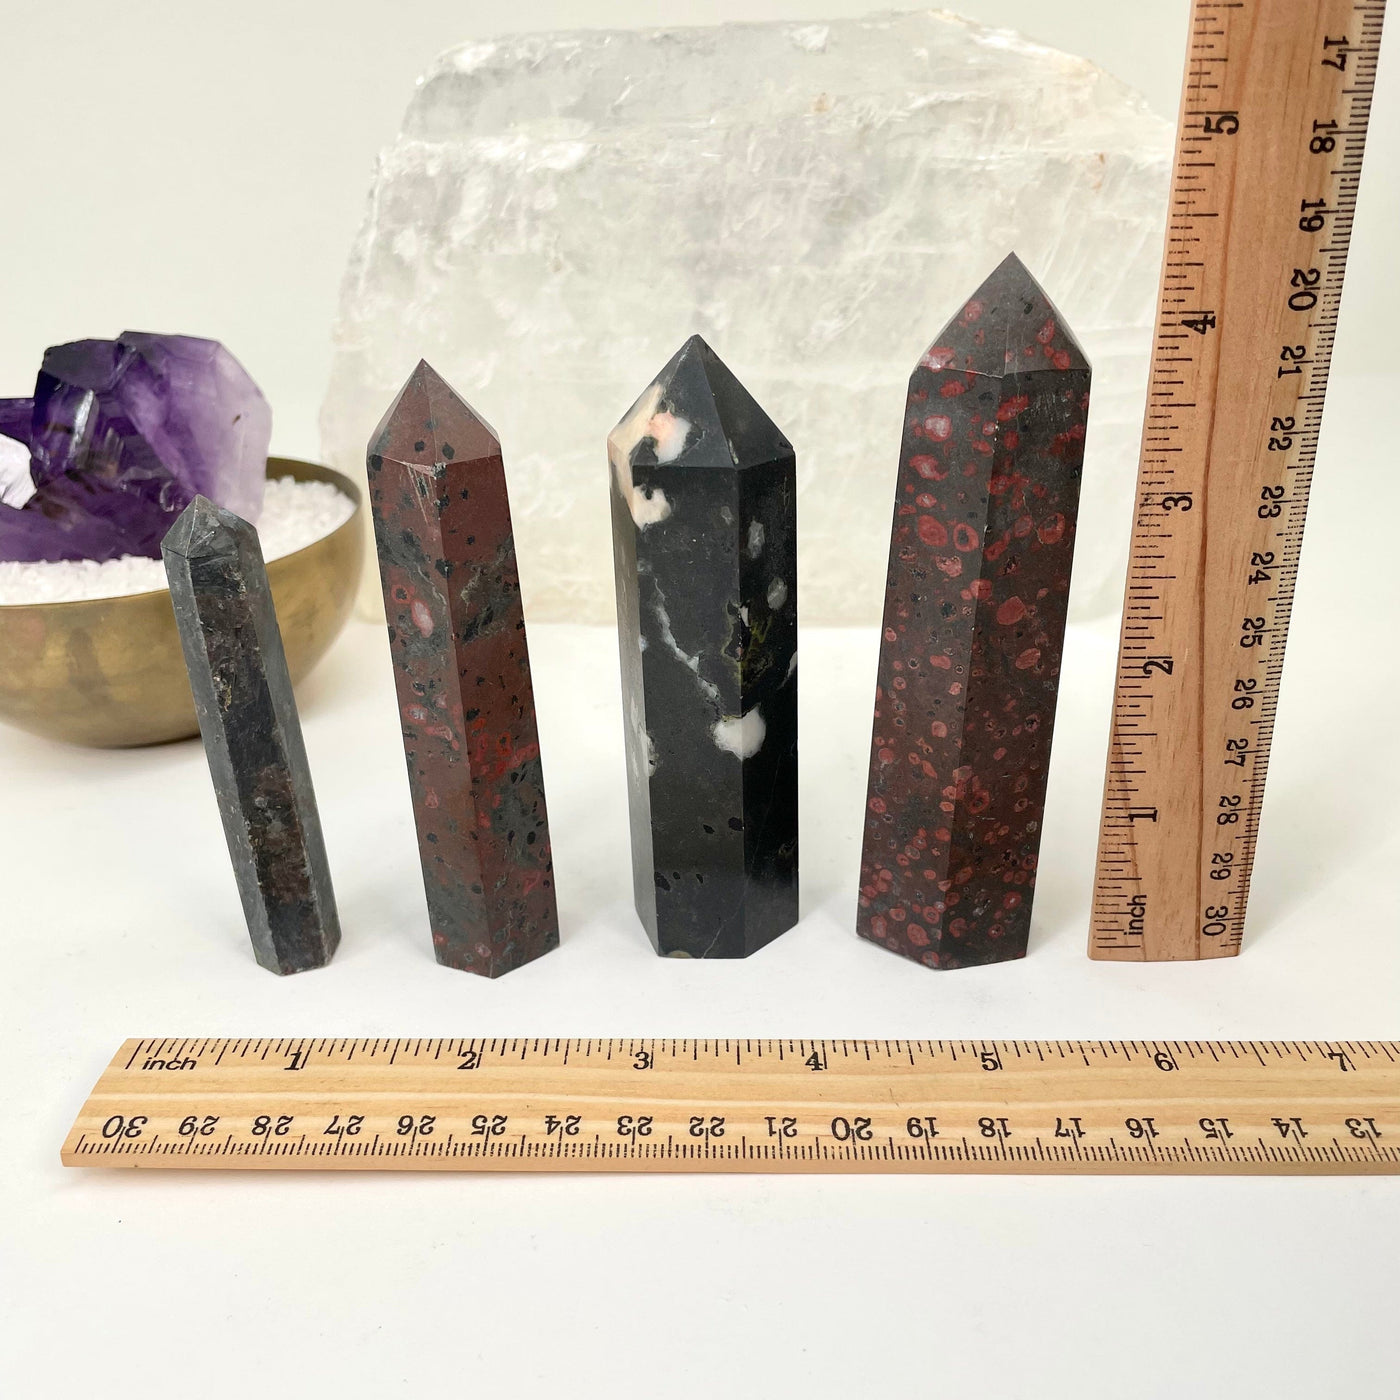 polished points next to a ruler for size reference 